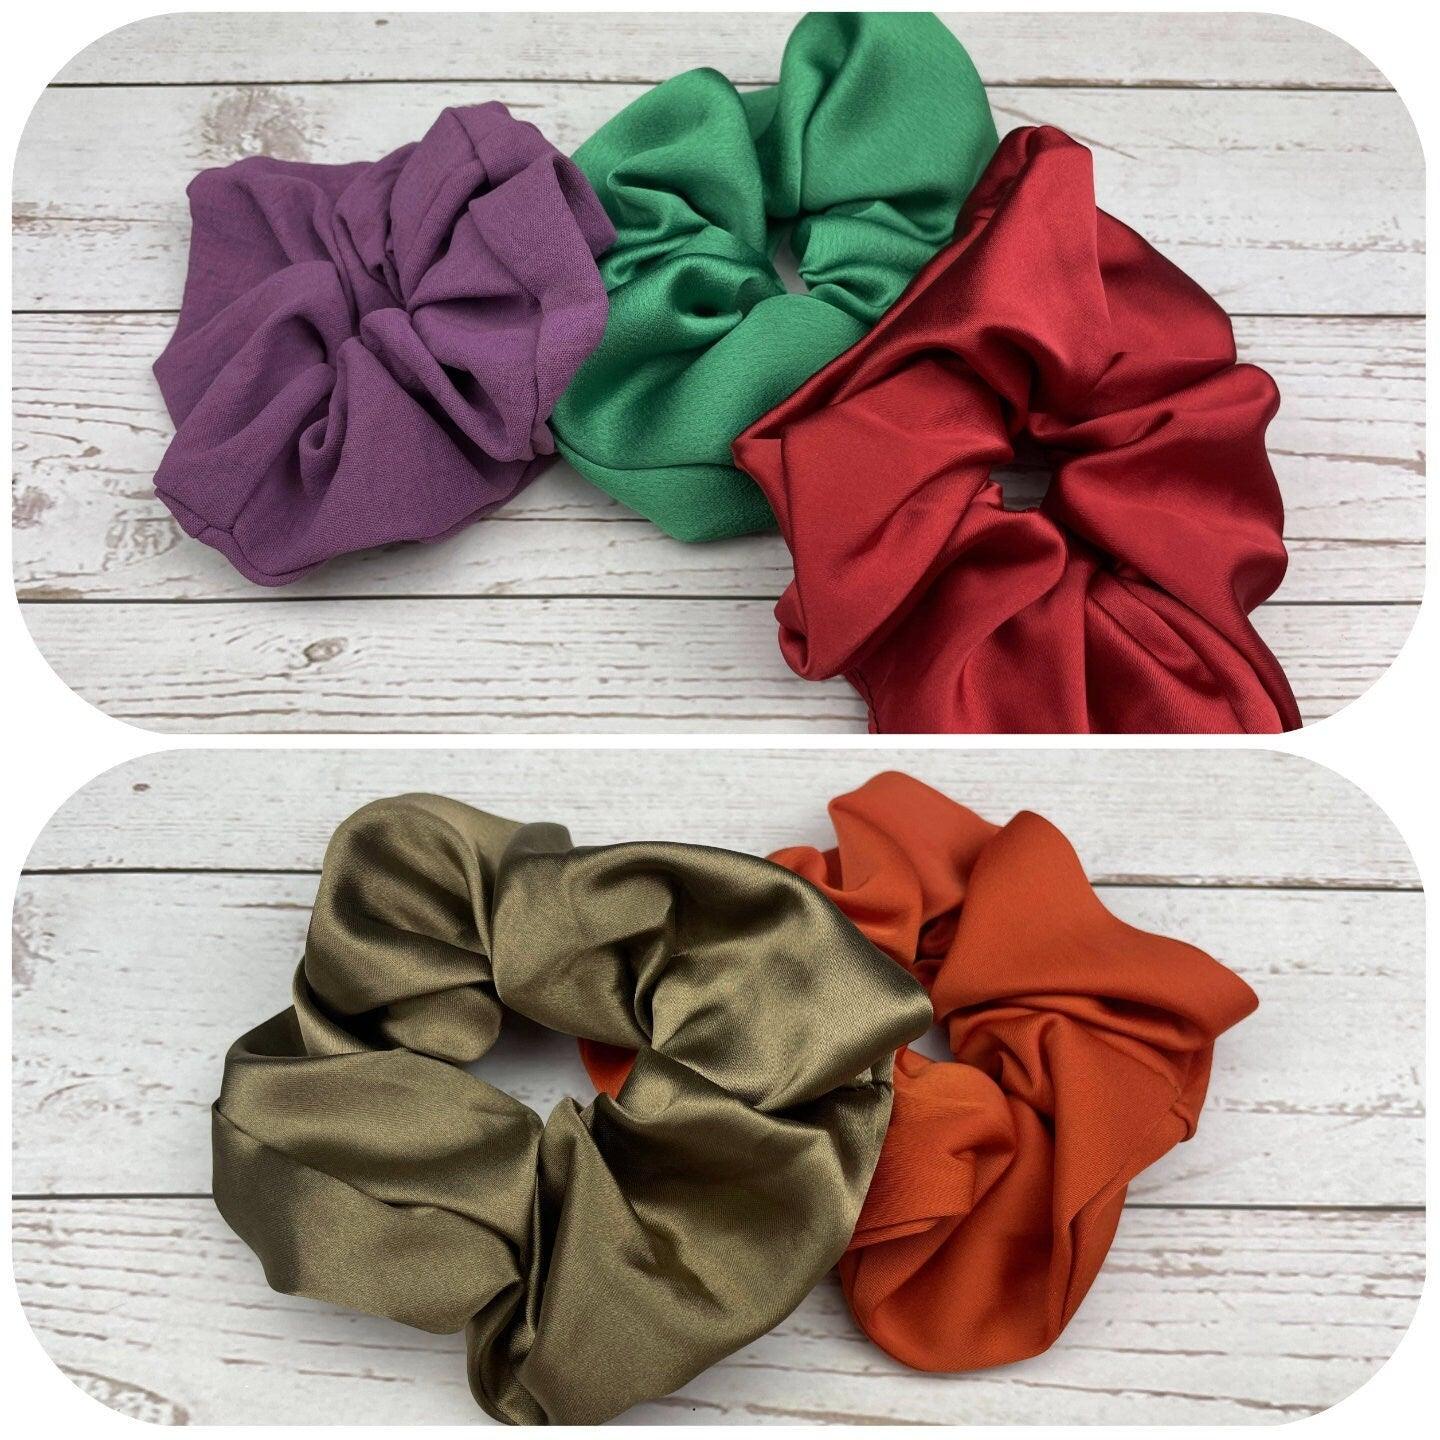 Elegant Handmade Satin Scrunchie with Bow - Colorful Pattern Hair Accessory in Green, Lilac, Red, Beige and Orange - Hair Ties and Scrunchies available at Moyoni Design